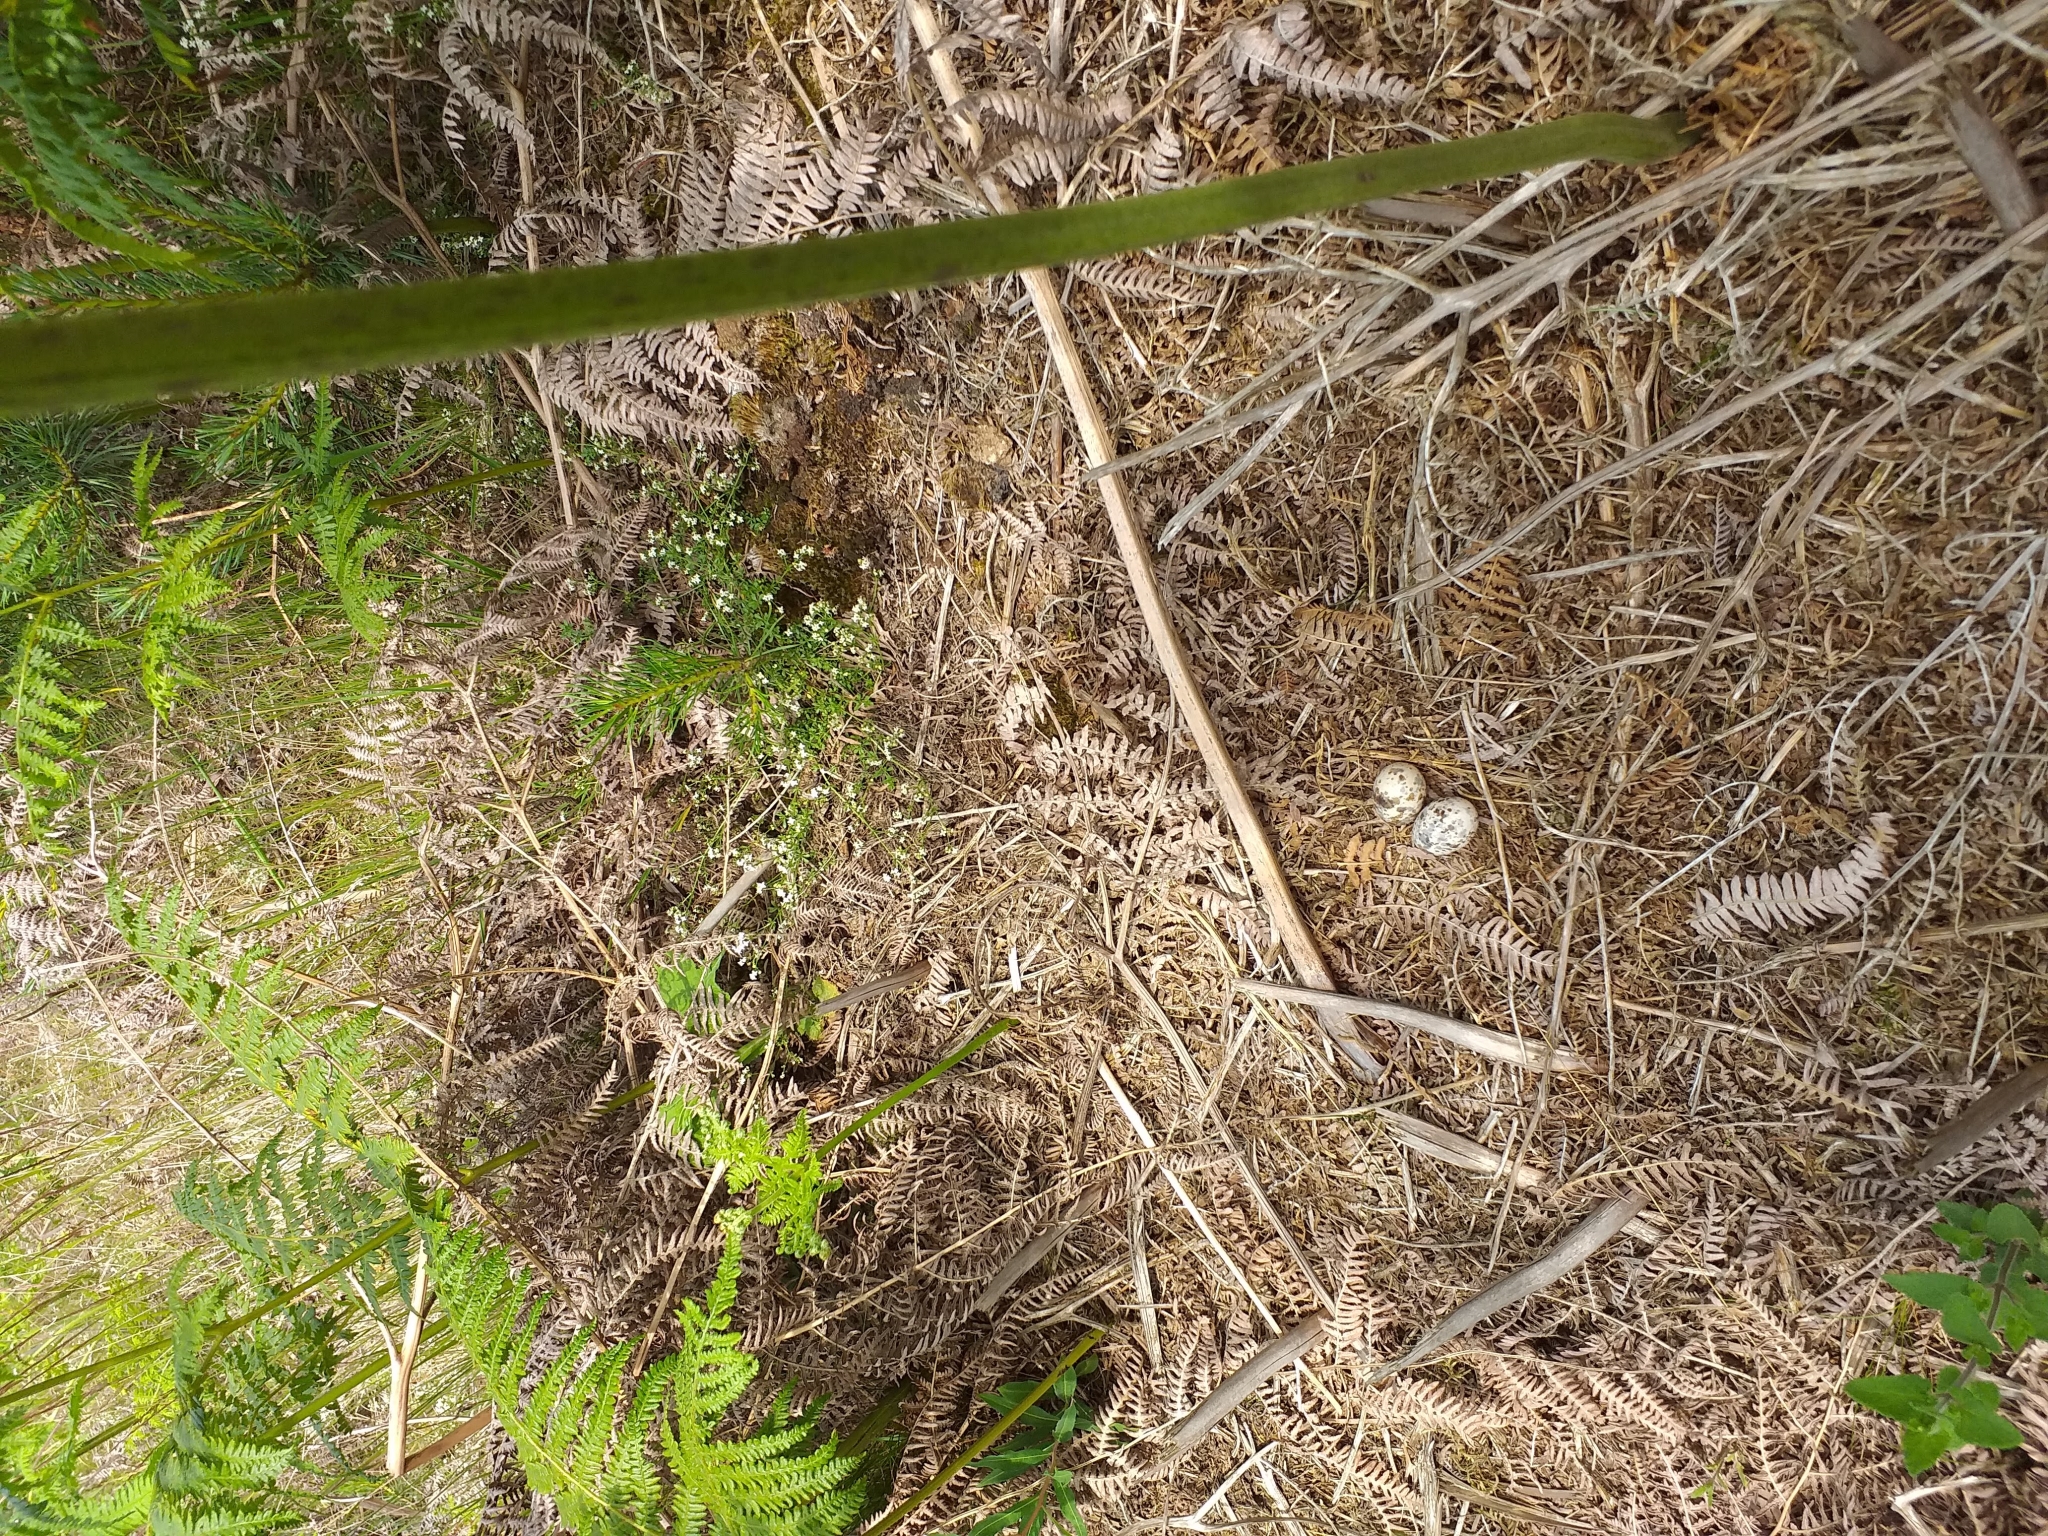 A photo from the FoTF Conservation Event - June 2019 - Nightjar Nest Hunt with members of the BTO - British Trust for Ornithology : A Nightjar nest, with some eggs